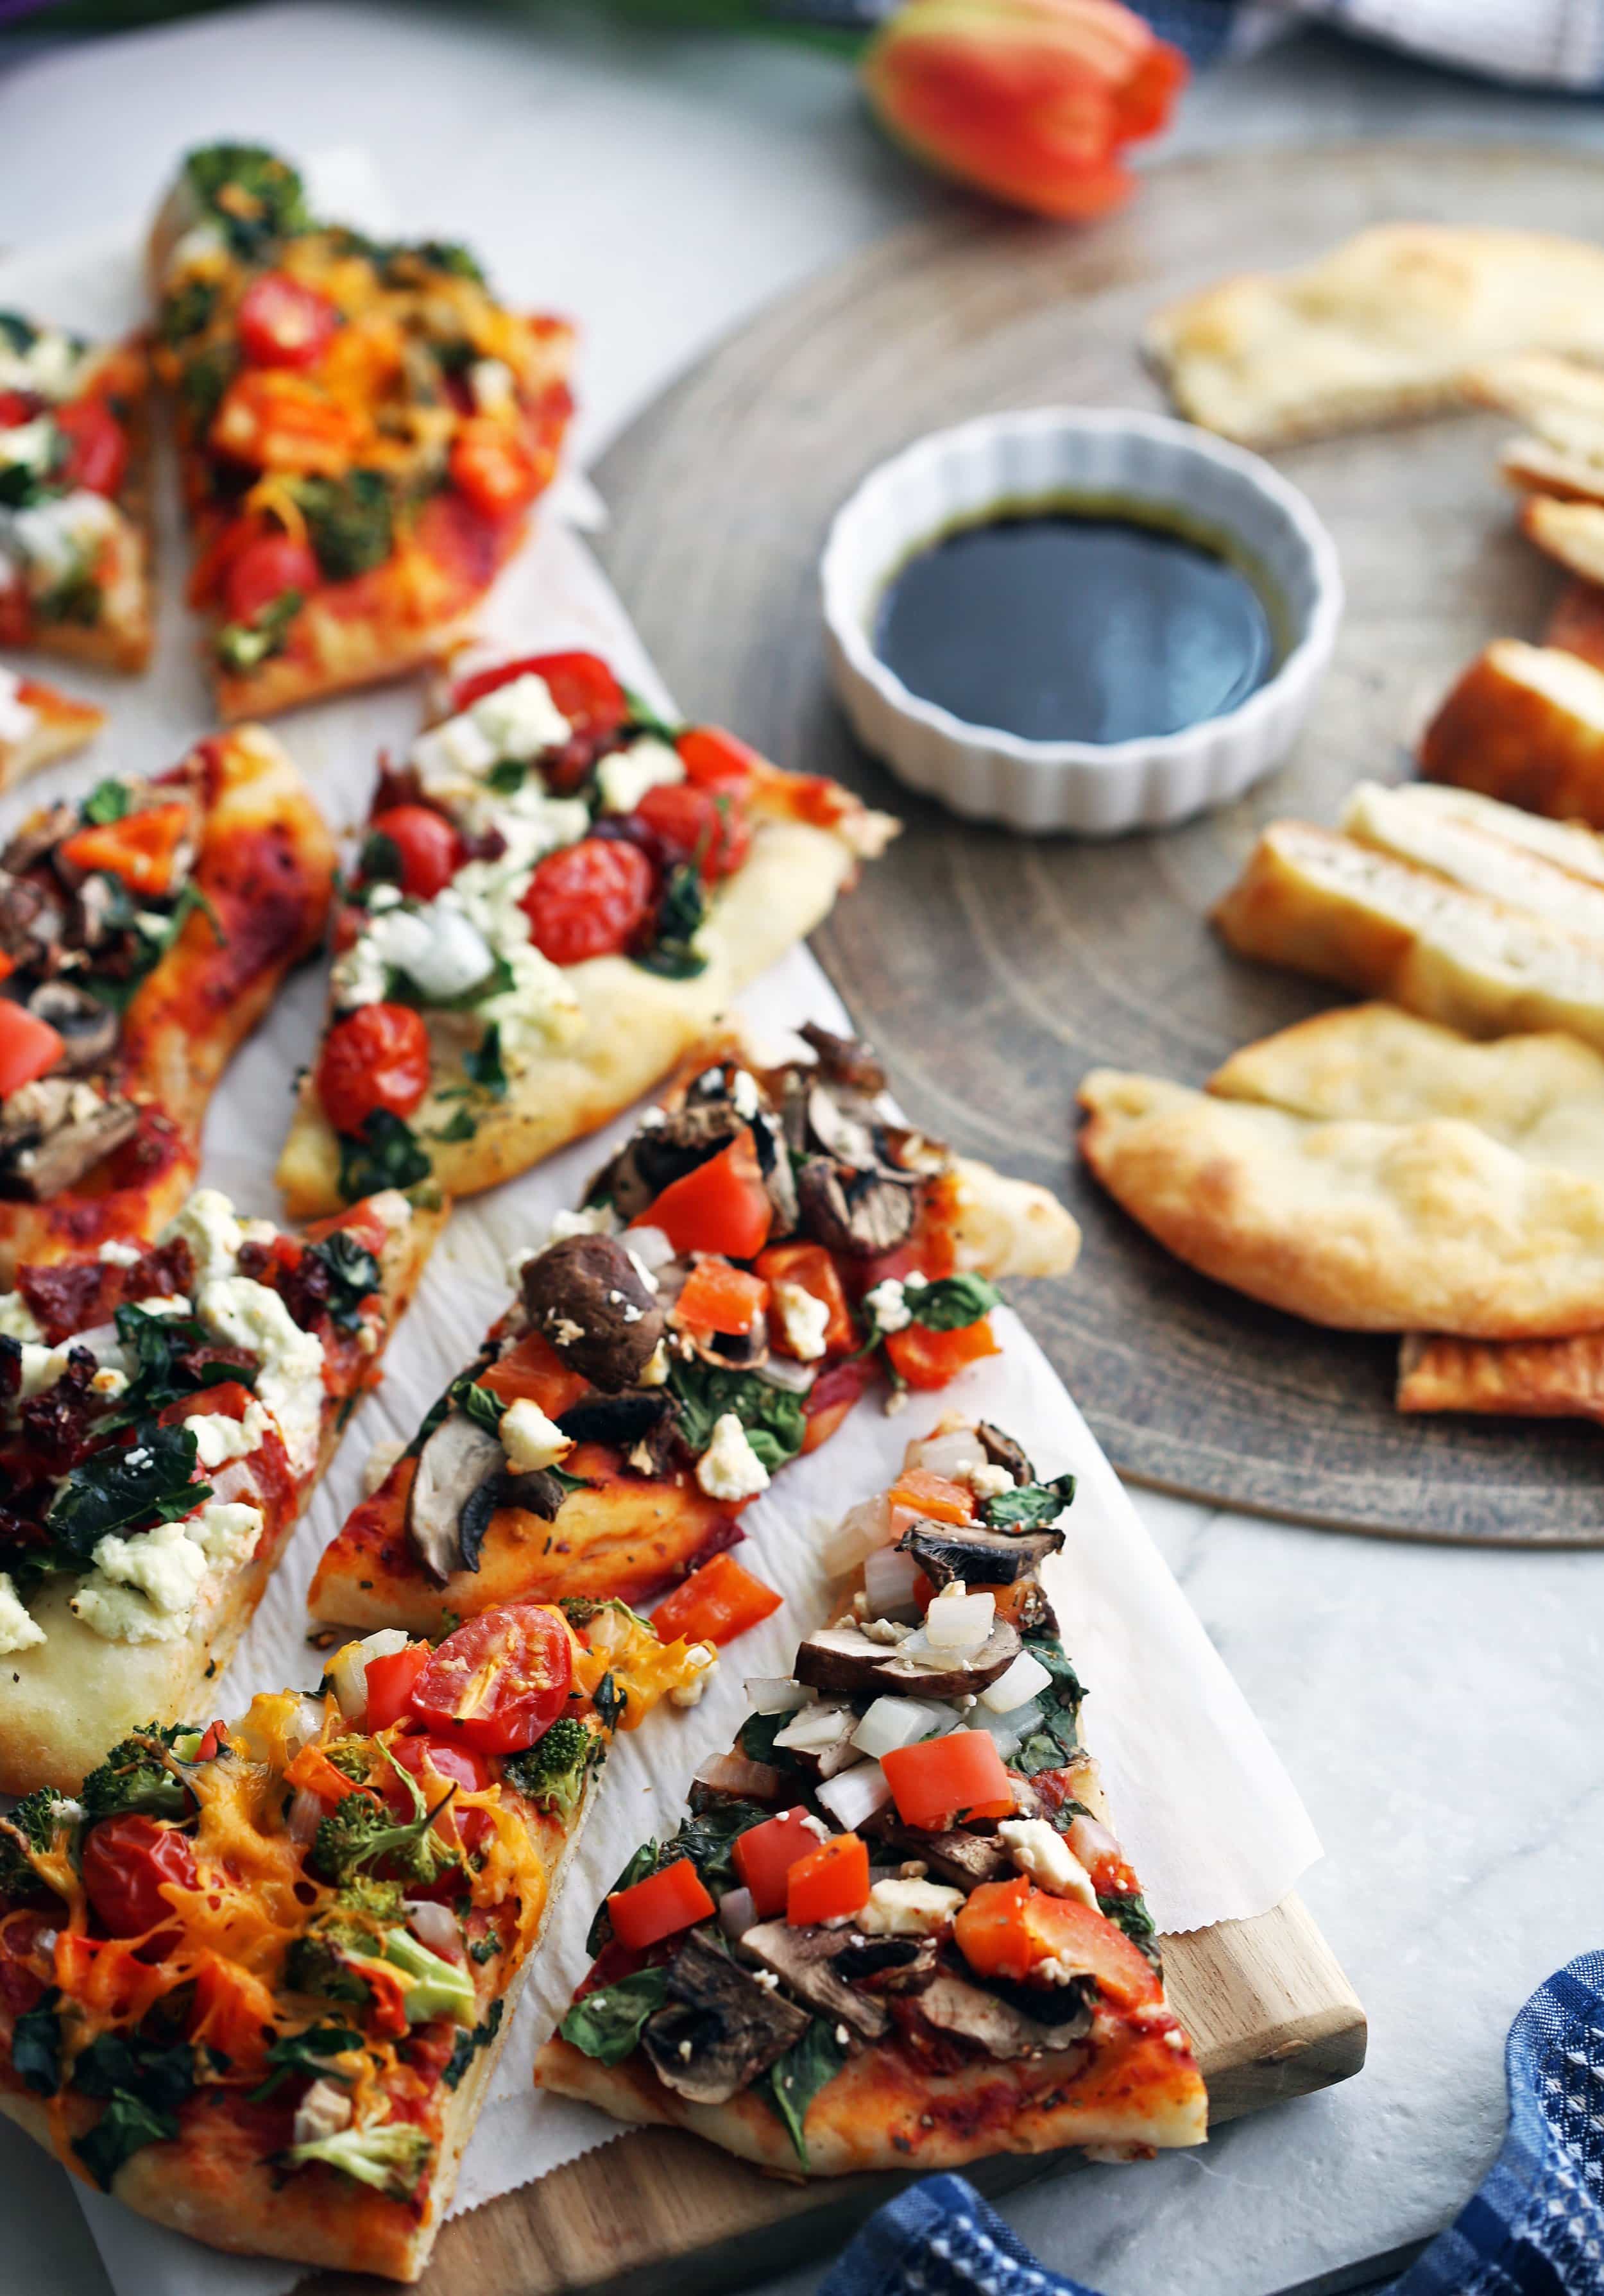 Two platters containing flatbread pizza with various toppings and plain flatbread sliced into pieces.